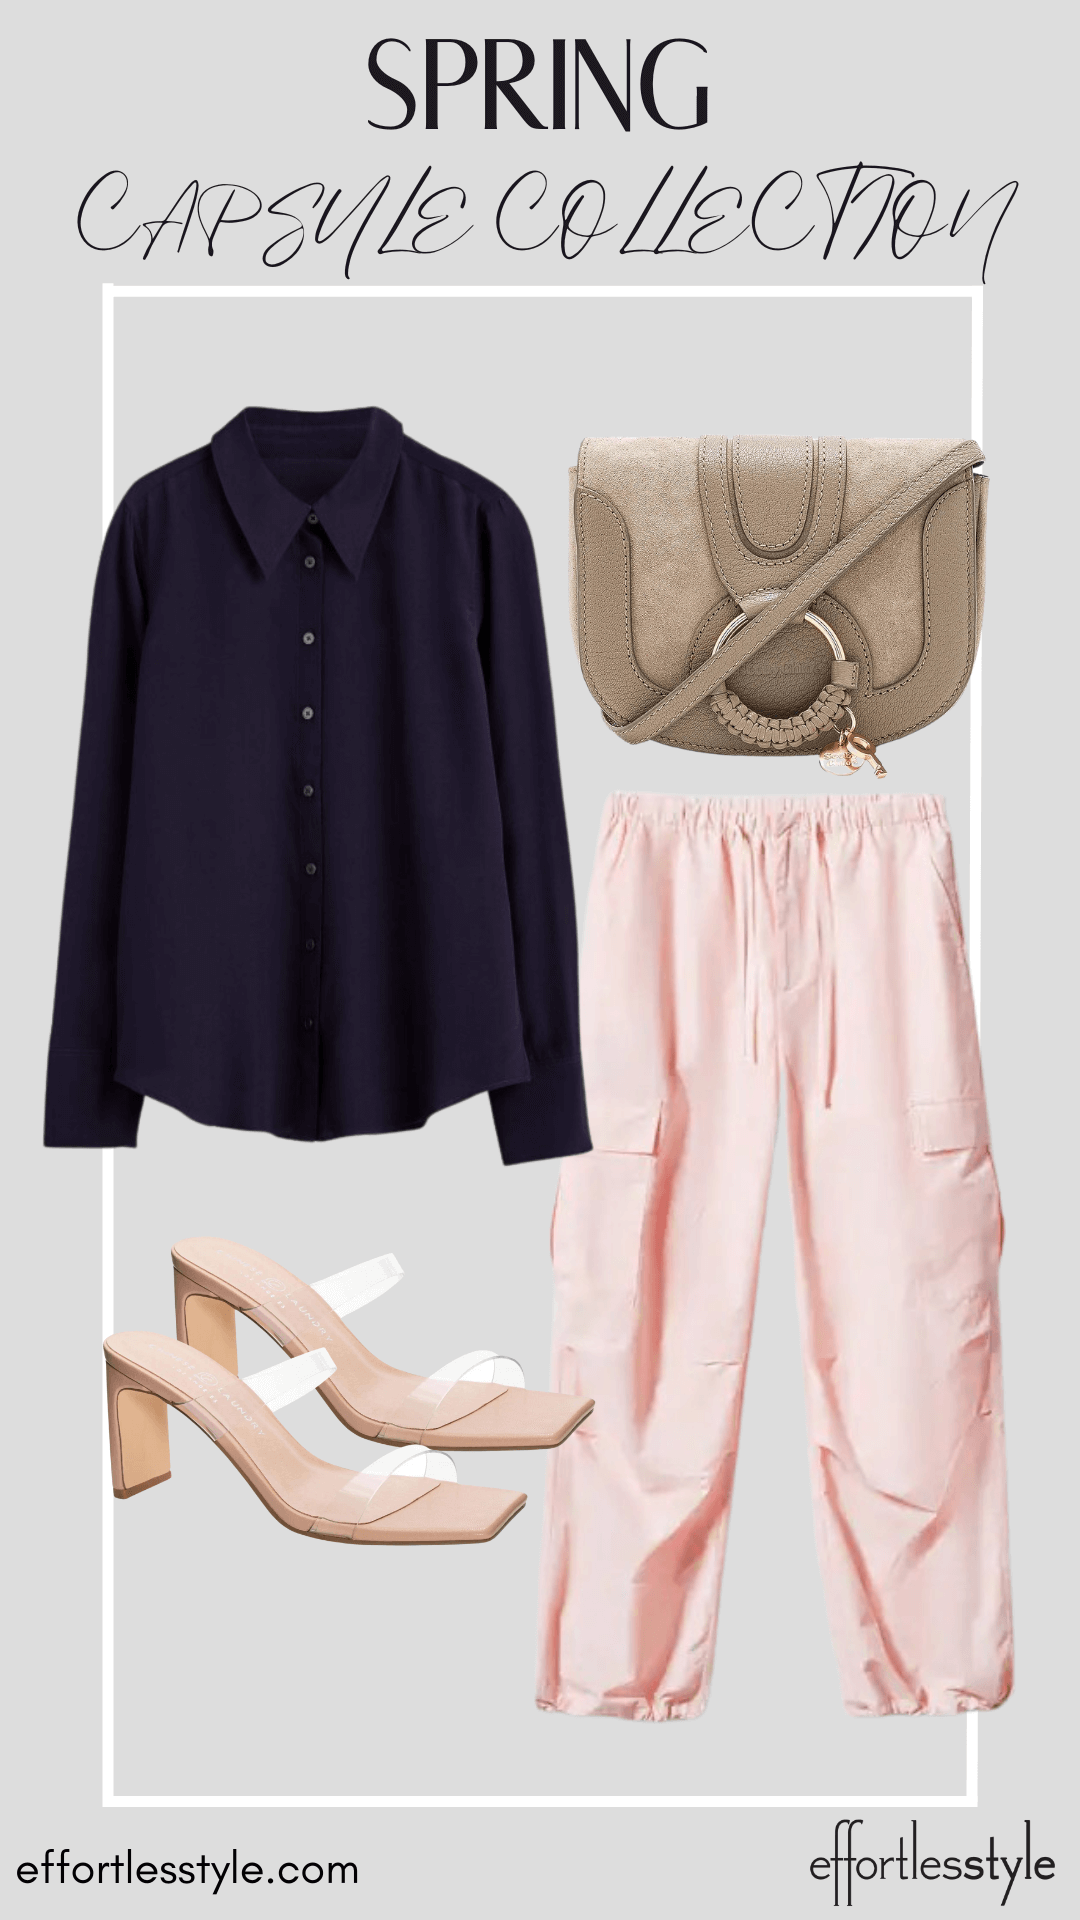 How To Wear Our Spring Capsule Wardrobe - Part 1 Solid Blouse & Cargo Pants how to dress up cargo pants for spring how to wear heels with cargo pants how to wear a dressy blouse with cargo pants Nashville area stylists share spring essentials